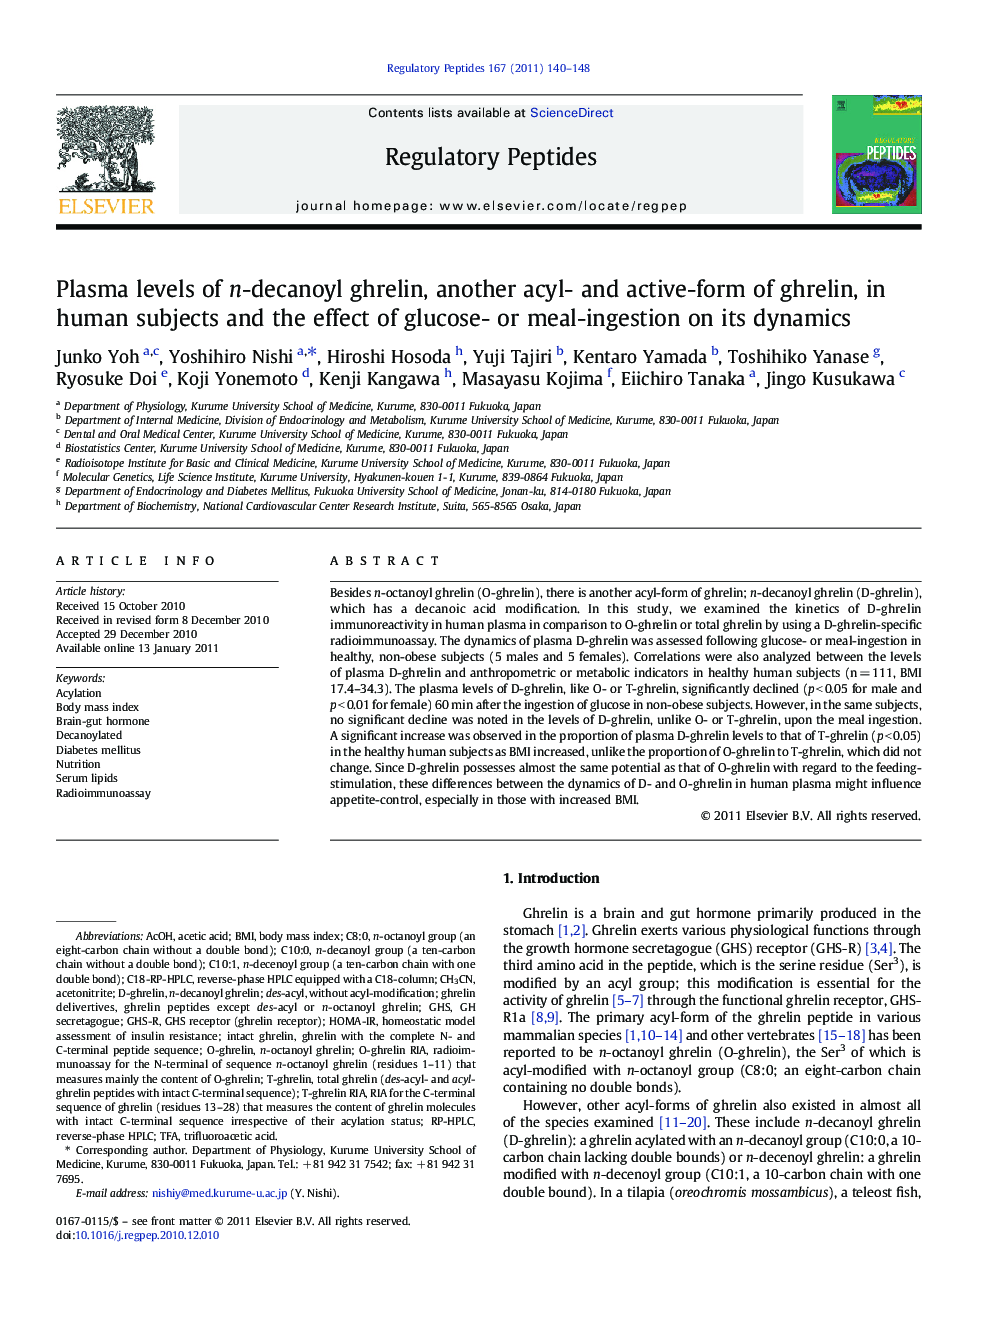 Plasma levels of n-decanoyl ghrelin, another acyl- and active-form of ghrelin, in human subjects and the effect of glucose- or meal-ingestion on its dynamics